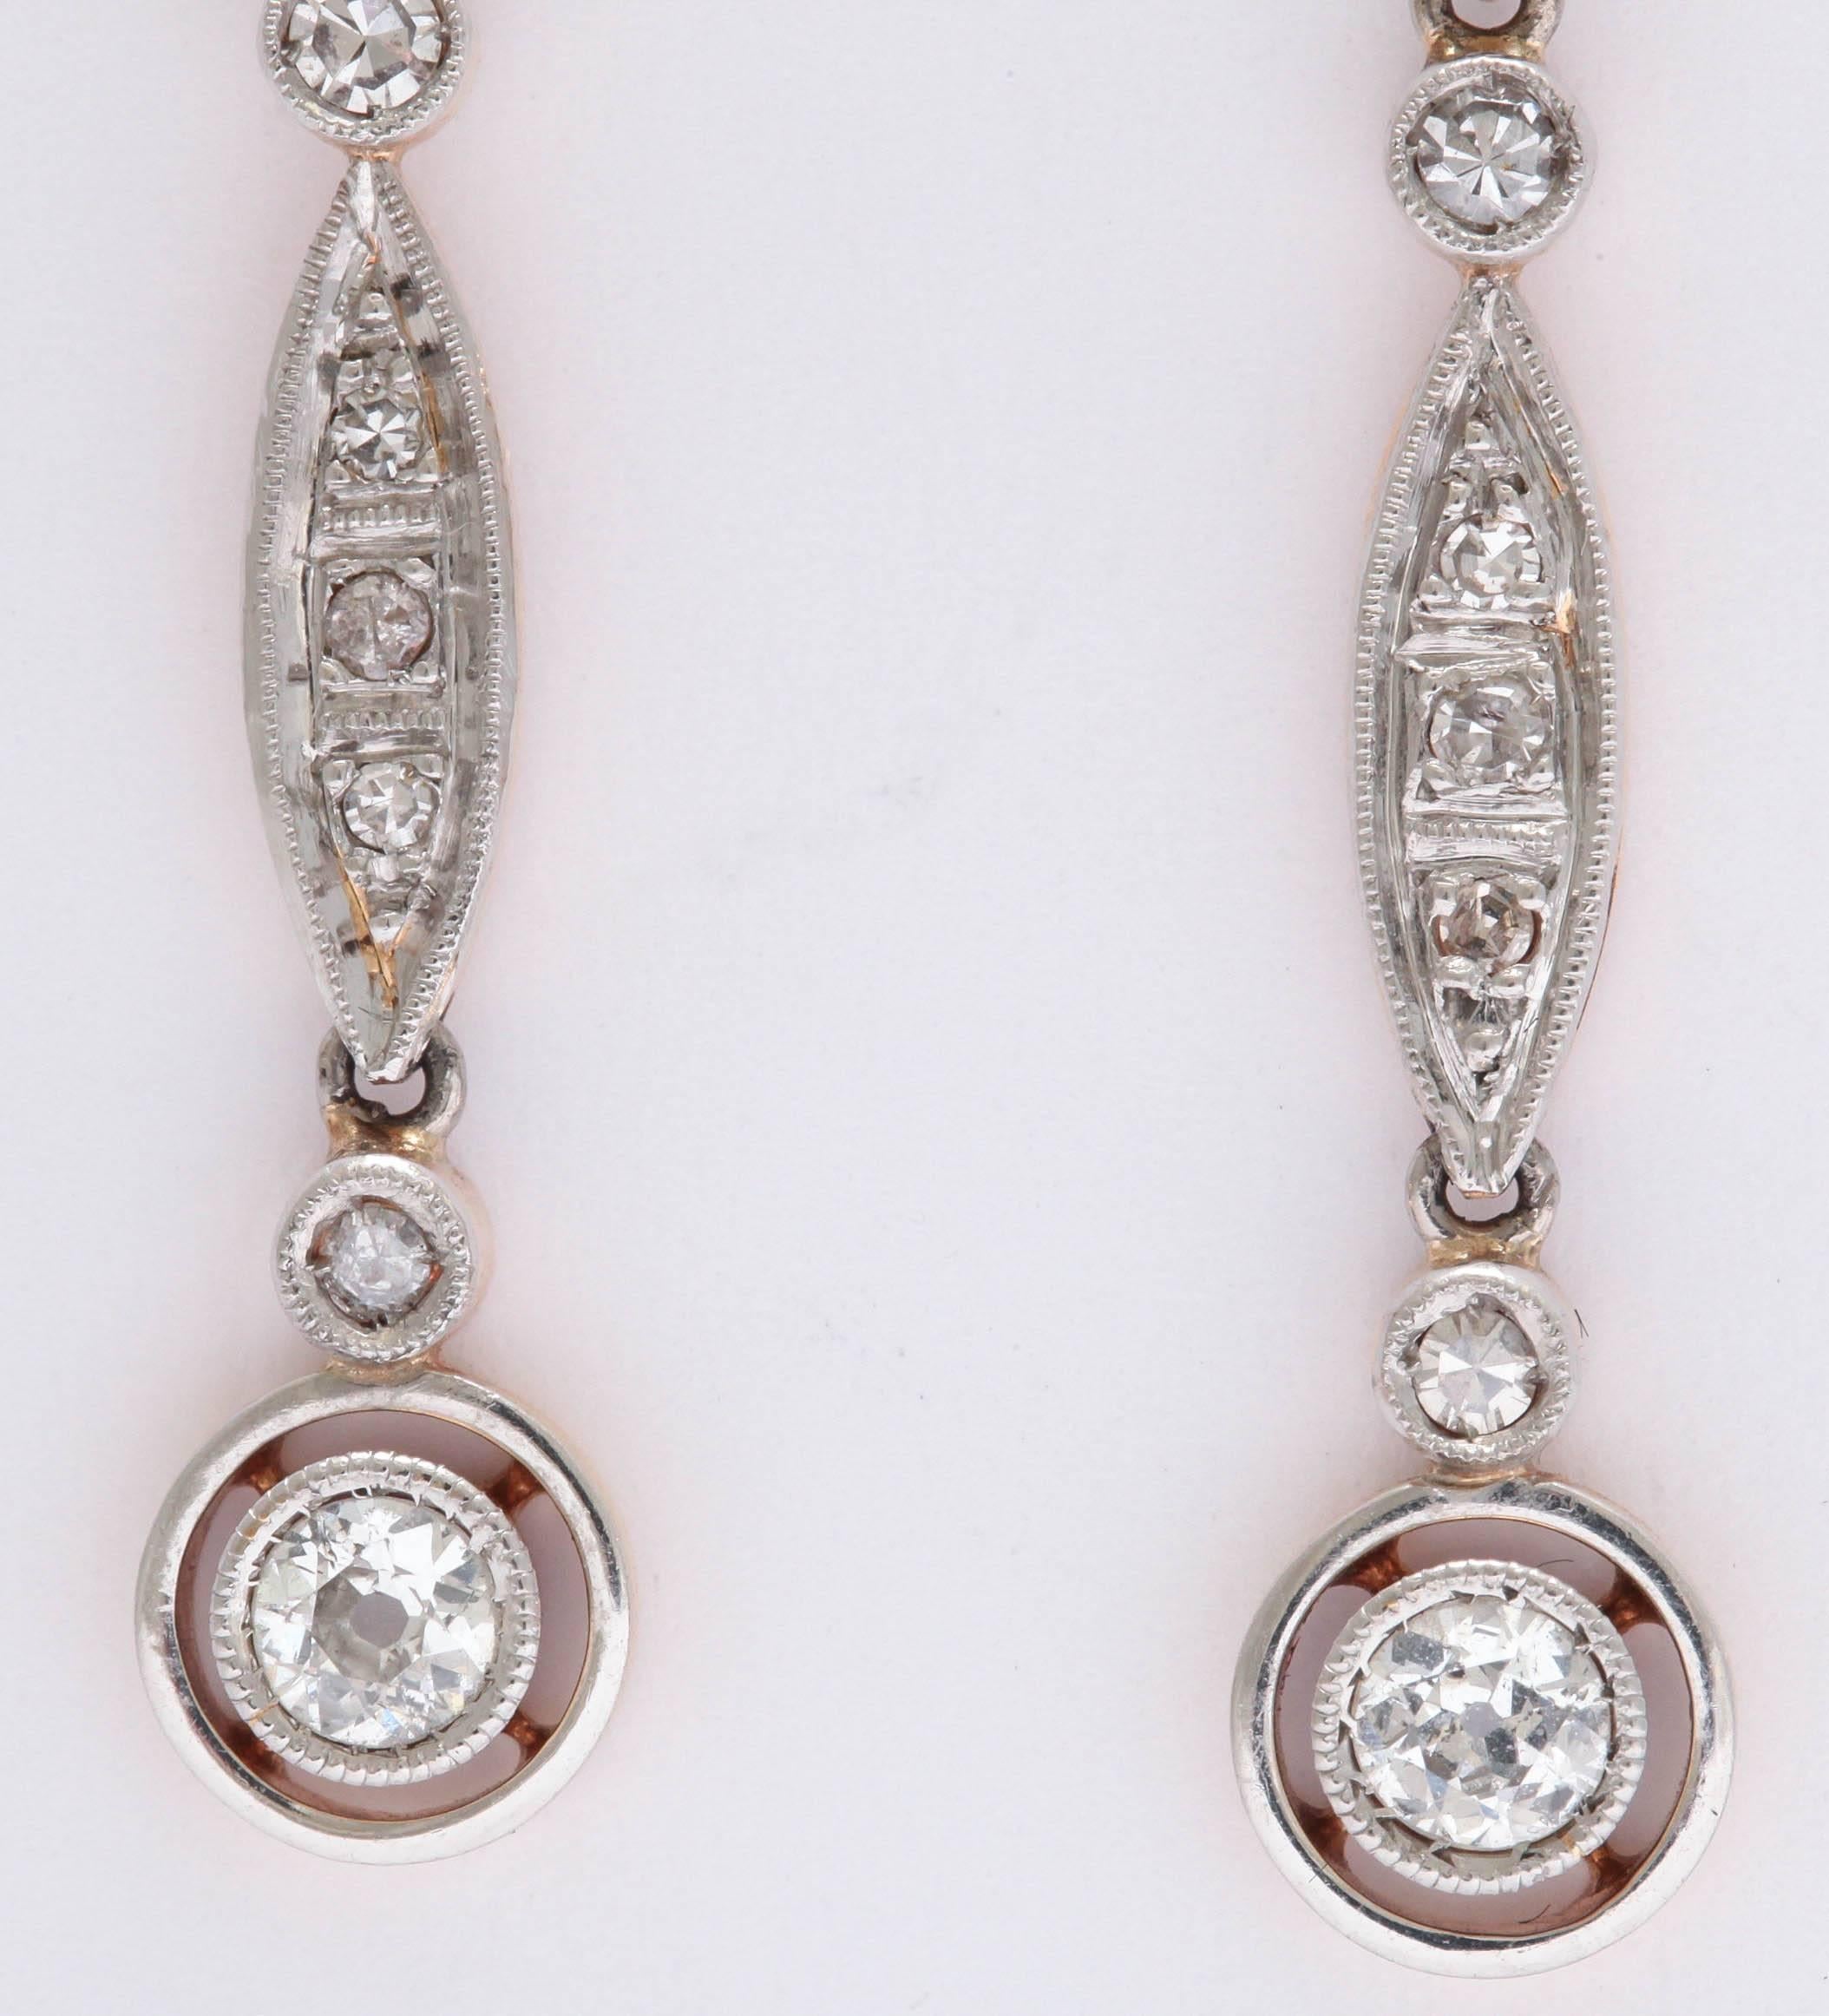 Antique Silver top & 18kt Yellow Gold back Drop Earrings.  Set in Millegrain and Pave. Delicate and very lovely - truly old.